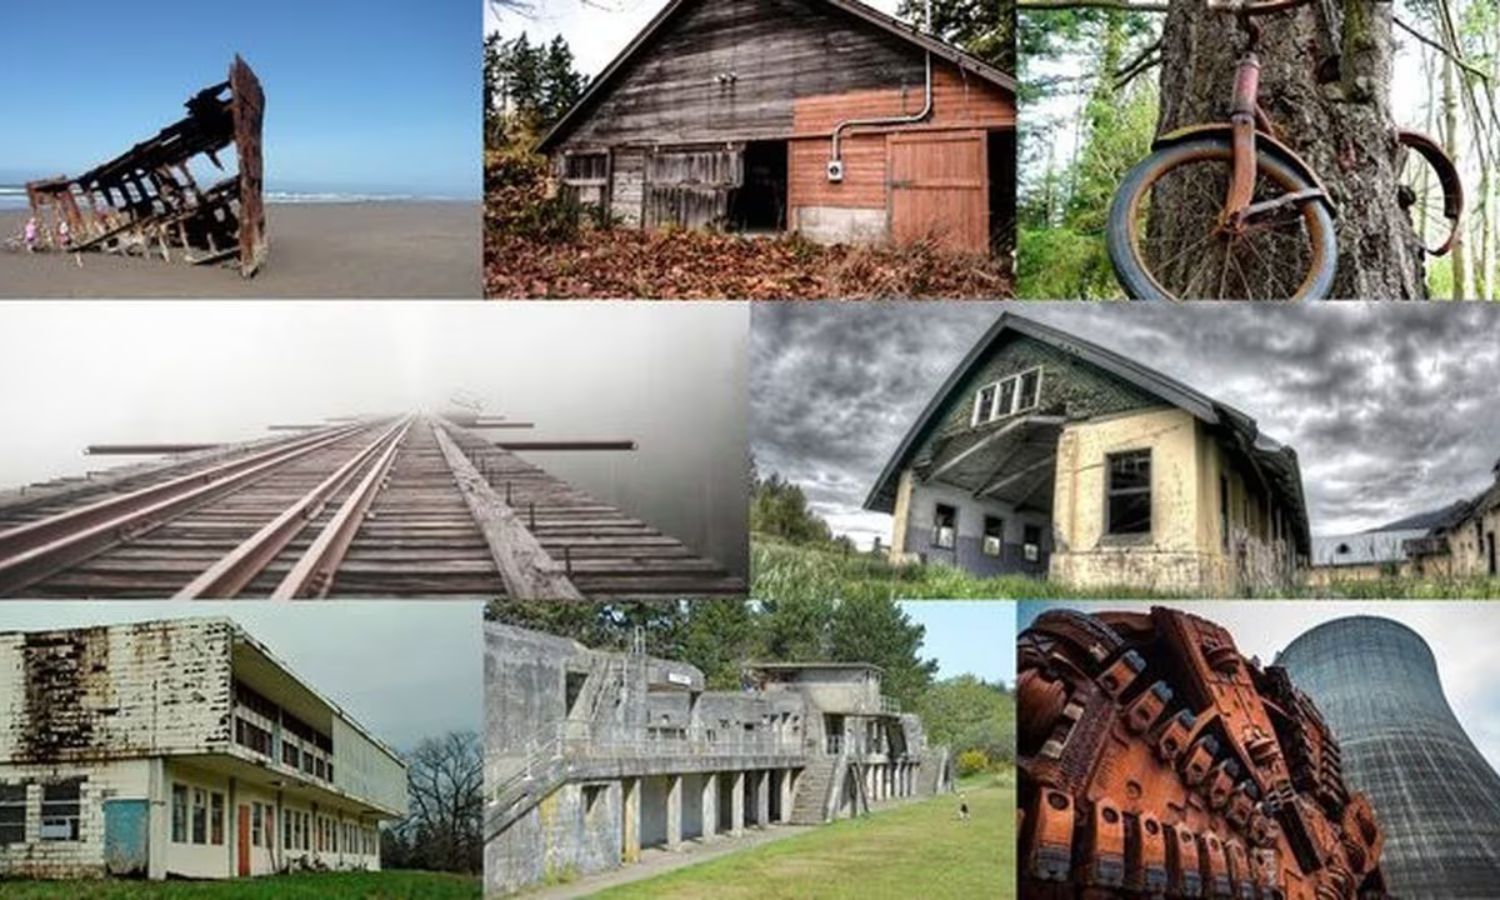 Oregon is Home to an Abandoned Town Most People Don’t Know About